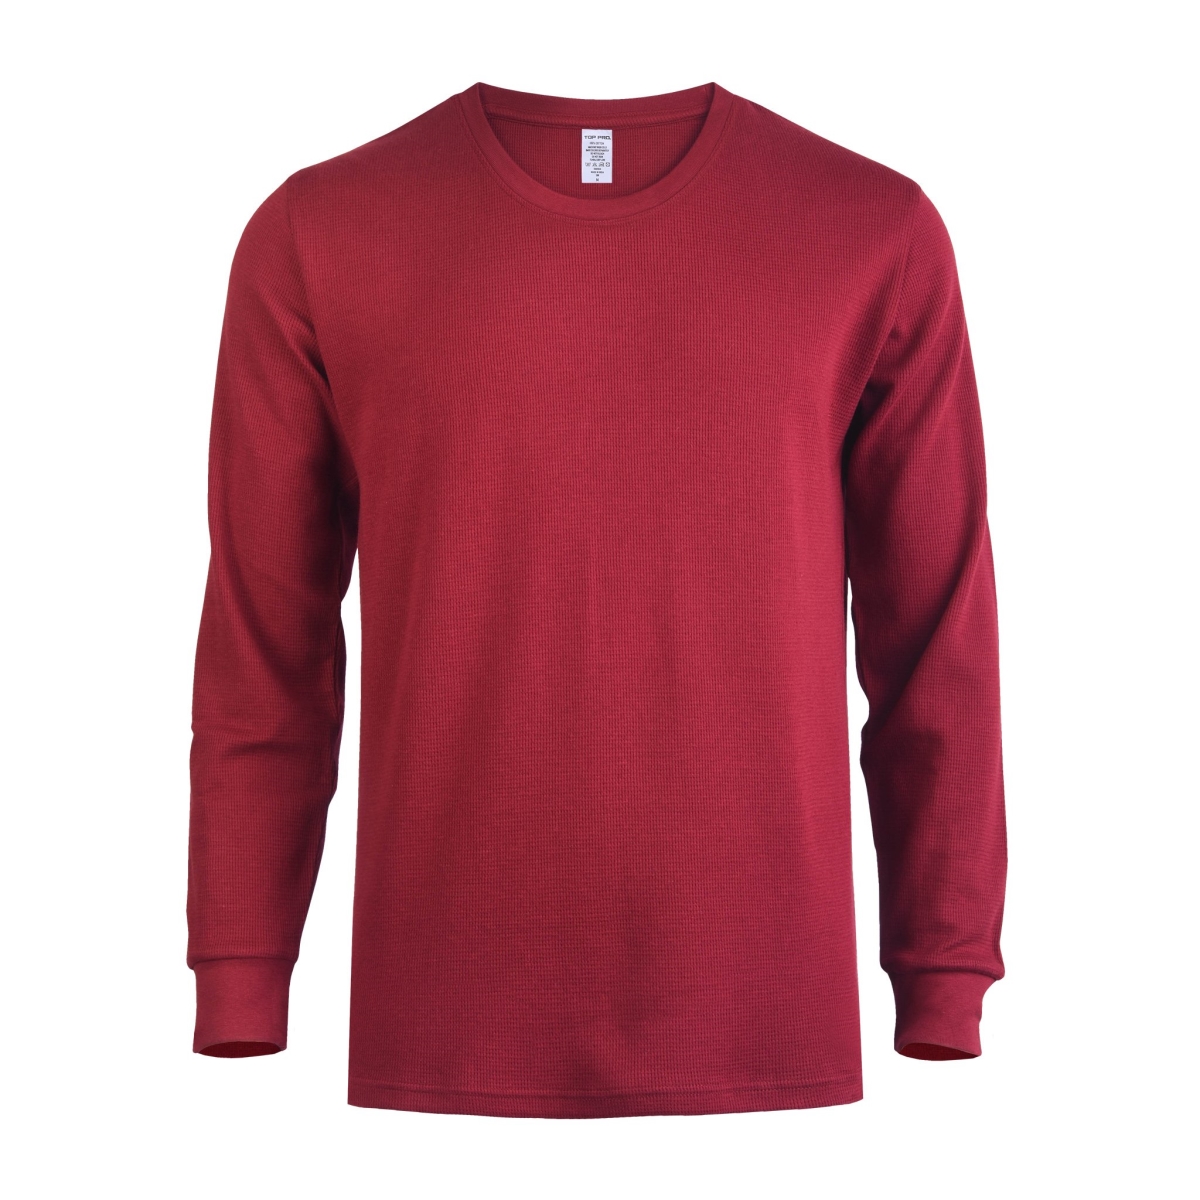 Picture of 247 Frenzy 247-KHT001 BUR-LG Mens Essentials Knocker Classic Breathable Cotton Waffle Knit Texture Thermal Top Long Sleeve T-Shirt&#44; Burgundy - Large